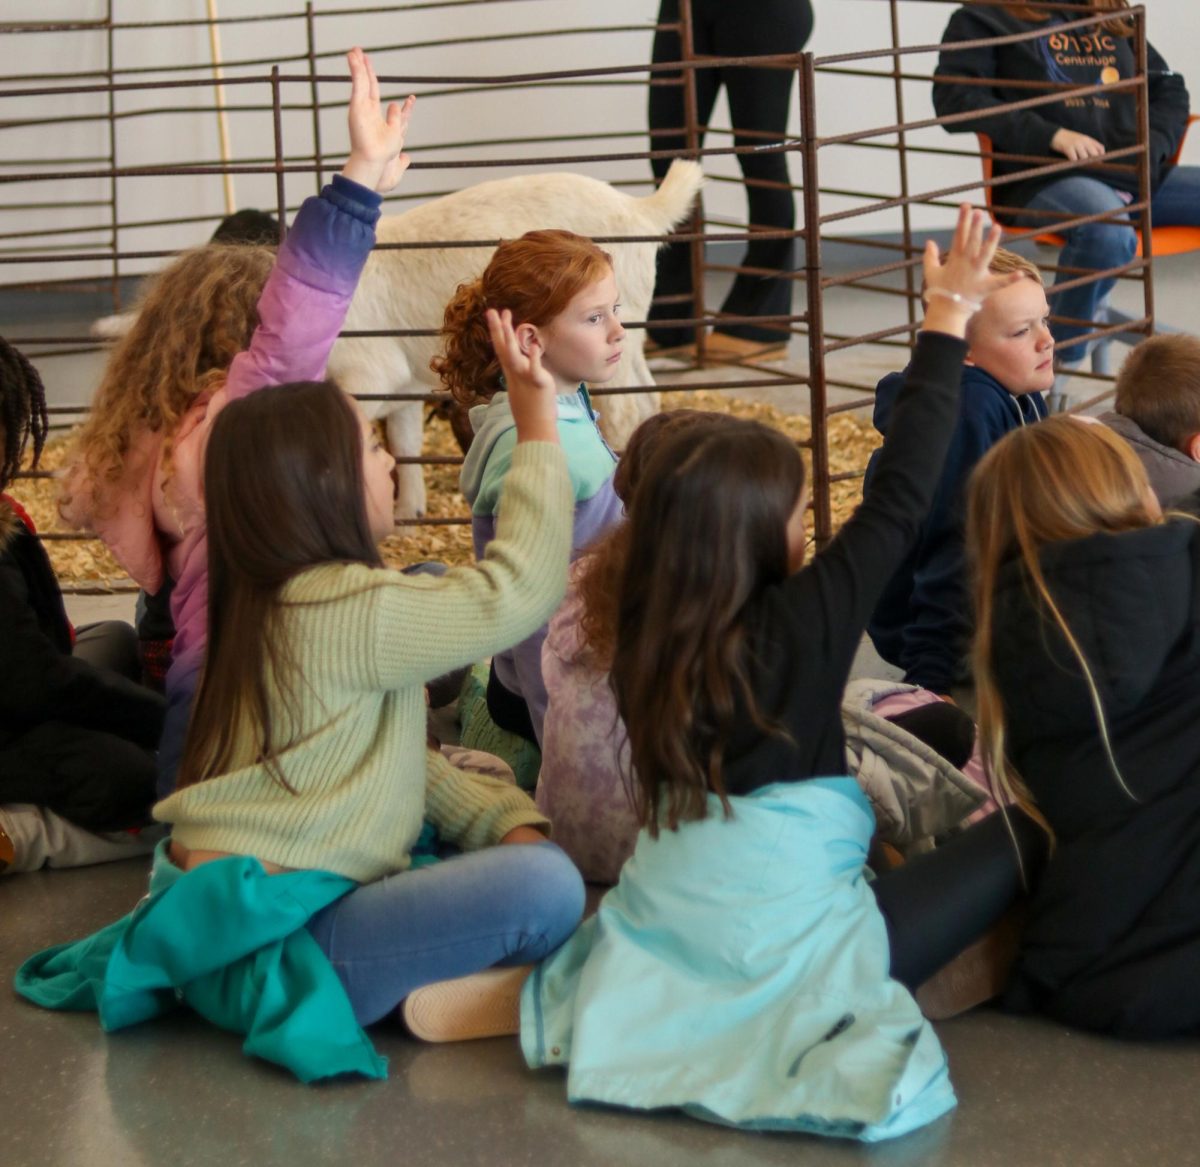 Multiple students, some raising their hands, sitting in a group on the floor.